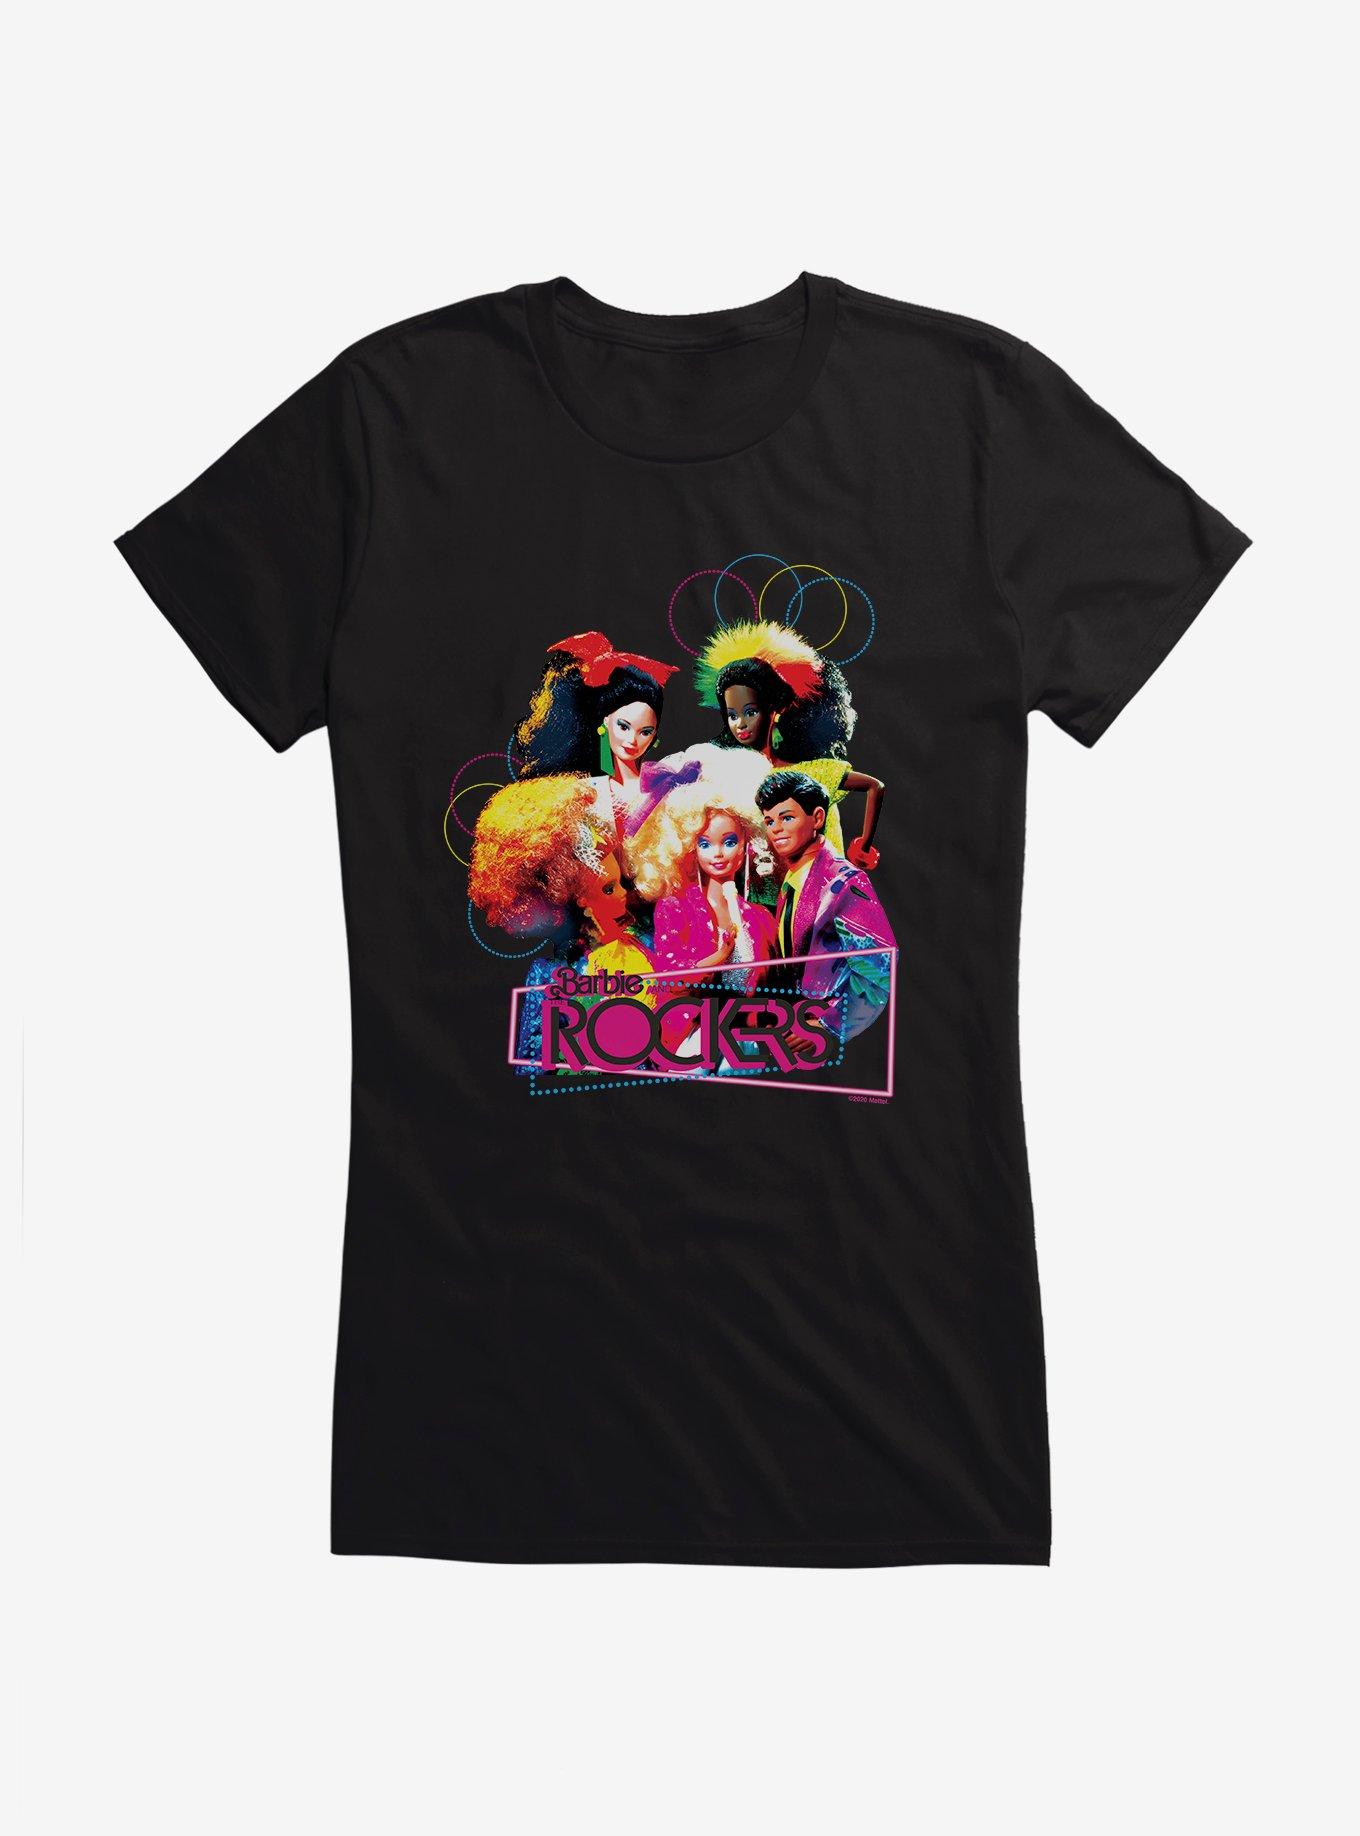 Barbie And The Rockers Neon Glam Girls T-Shirt, BLACK, hi-res